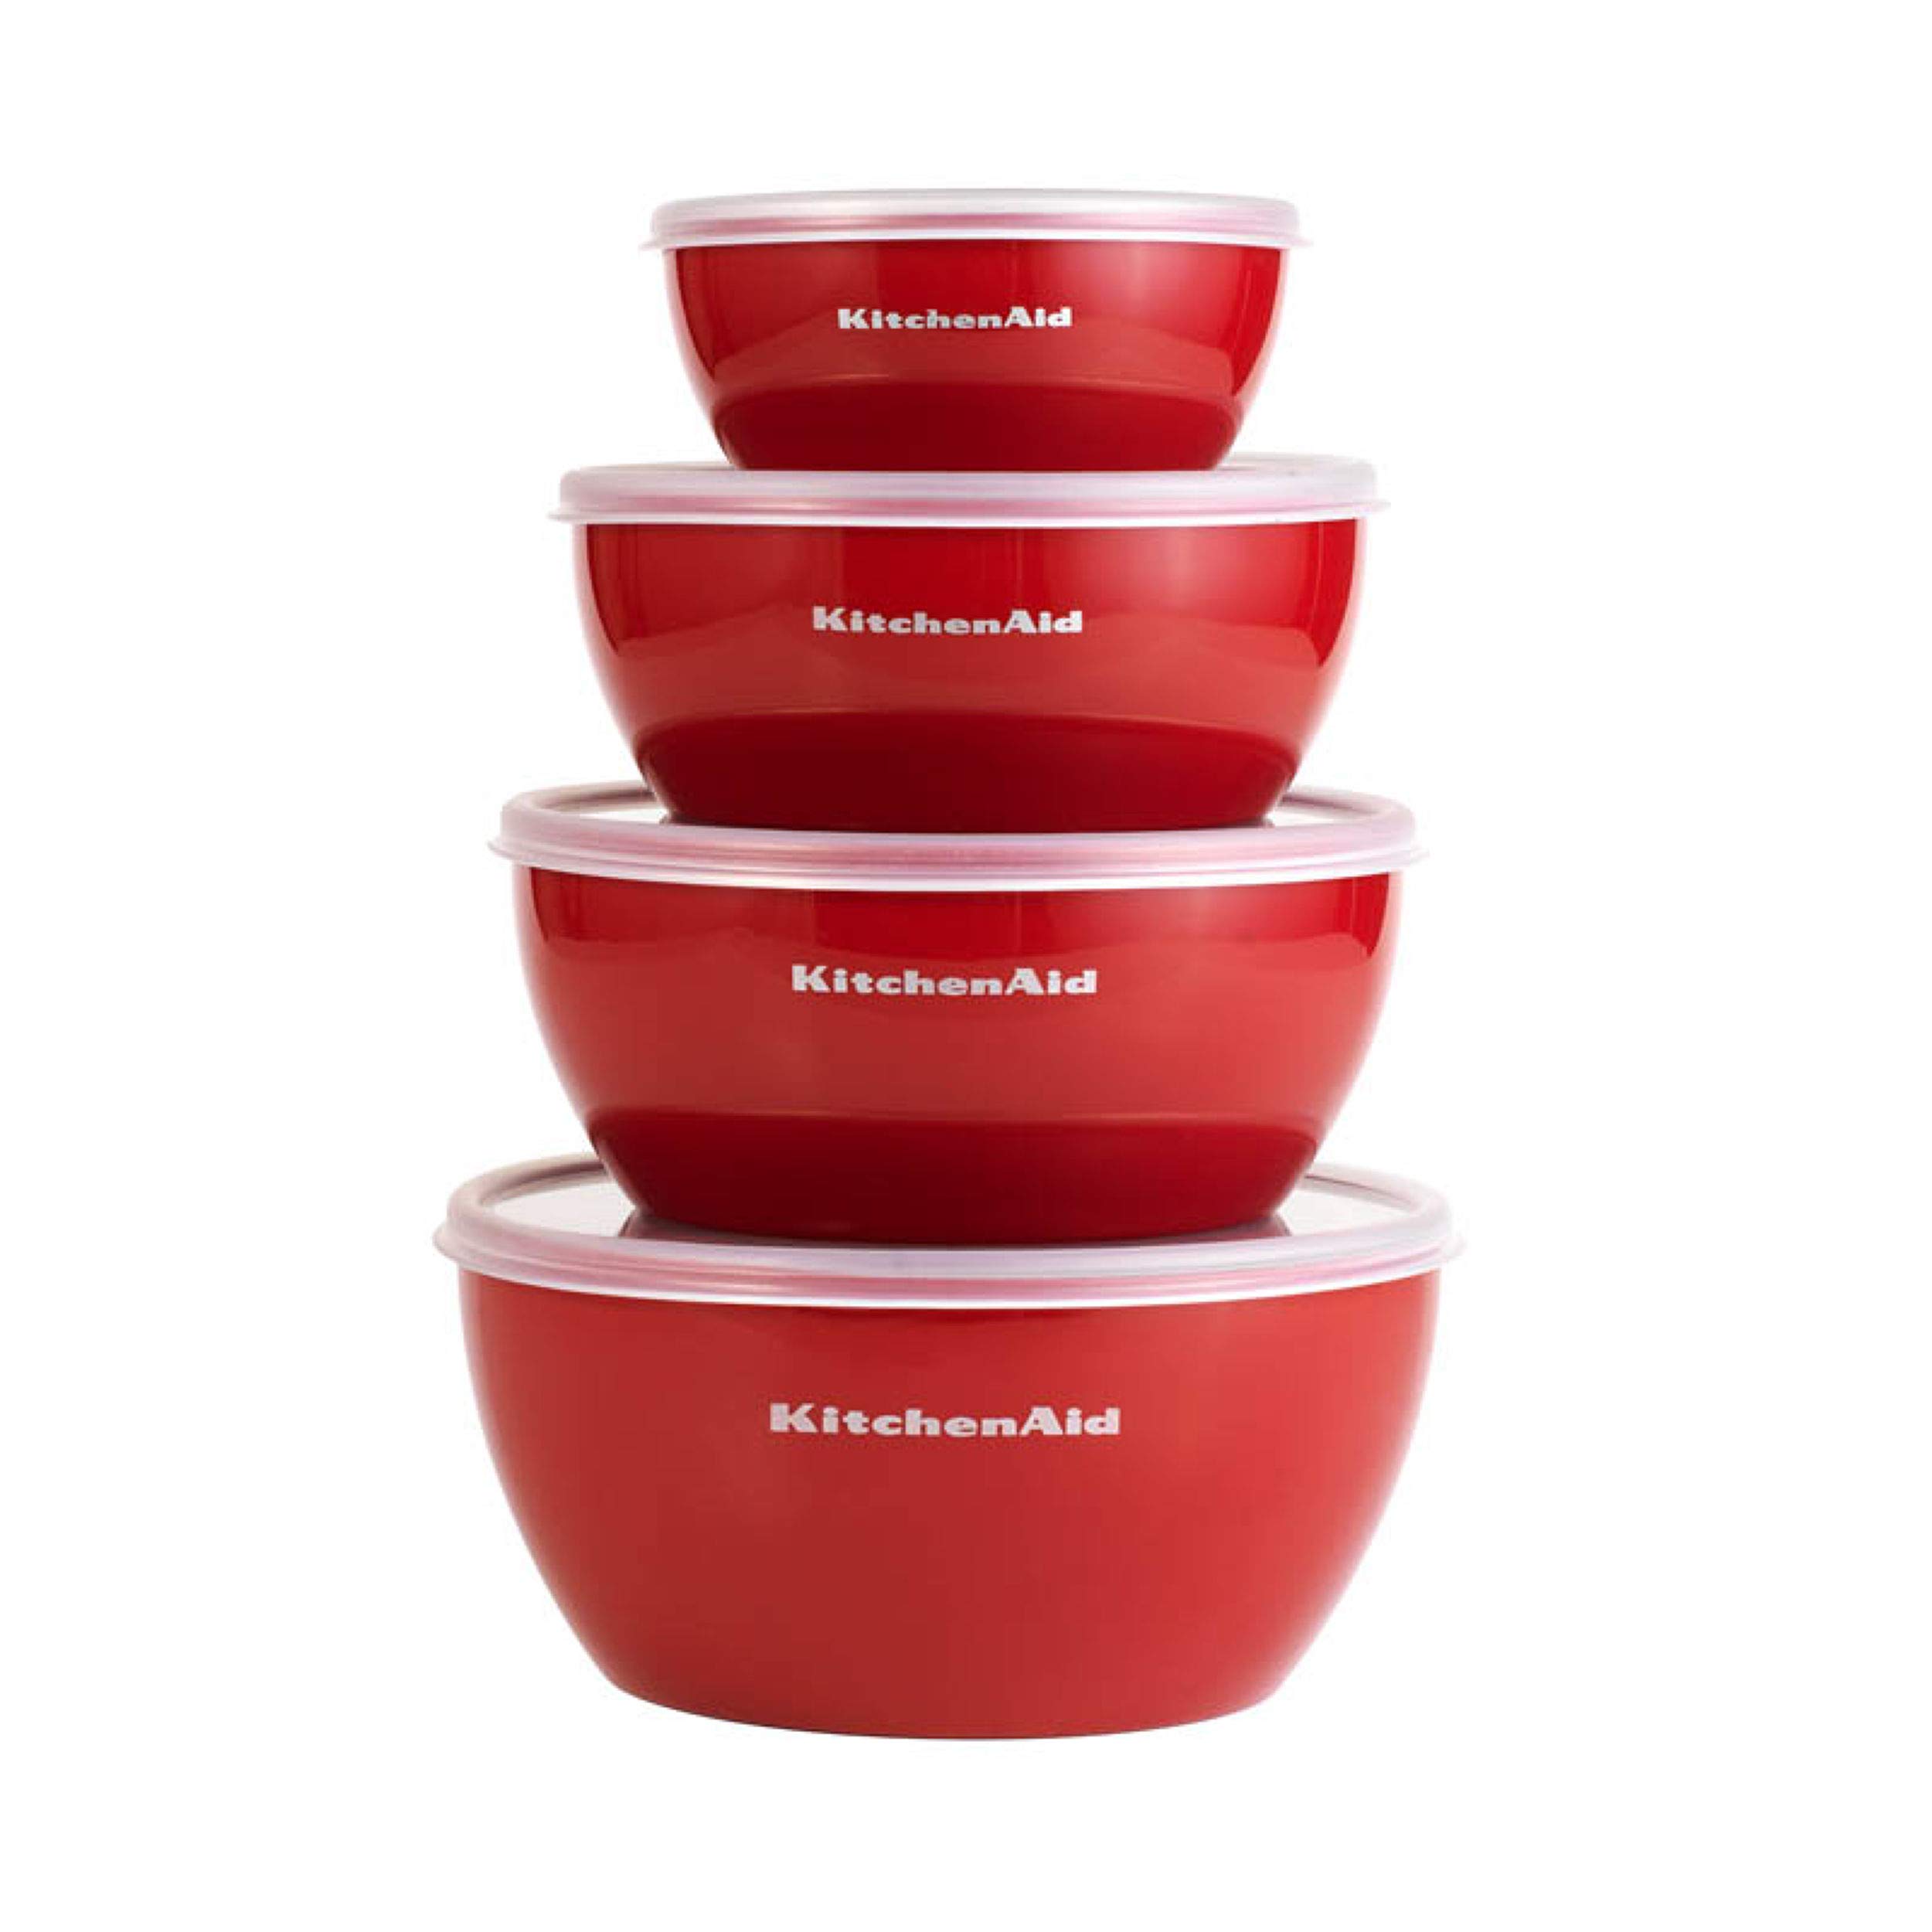 KitchenAid Classic Prep Bowls with Lids, Set of 4, Empire Red & Classic Ice Cream Scoop, One Size, Black 2